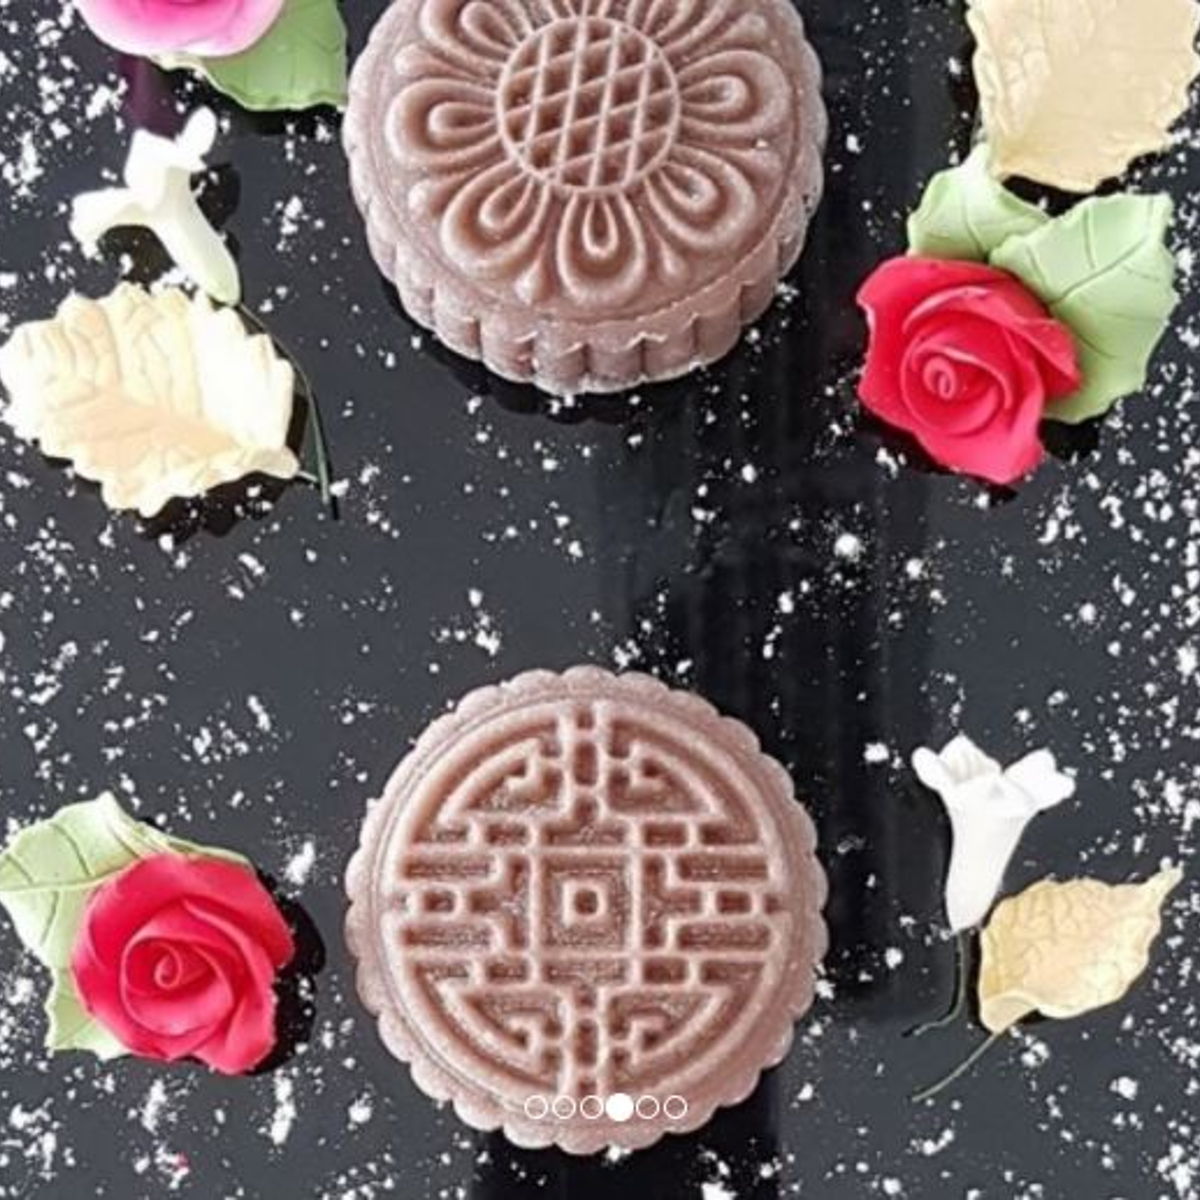 Learn How To Prepare Snow Skin Mooncakes